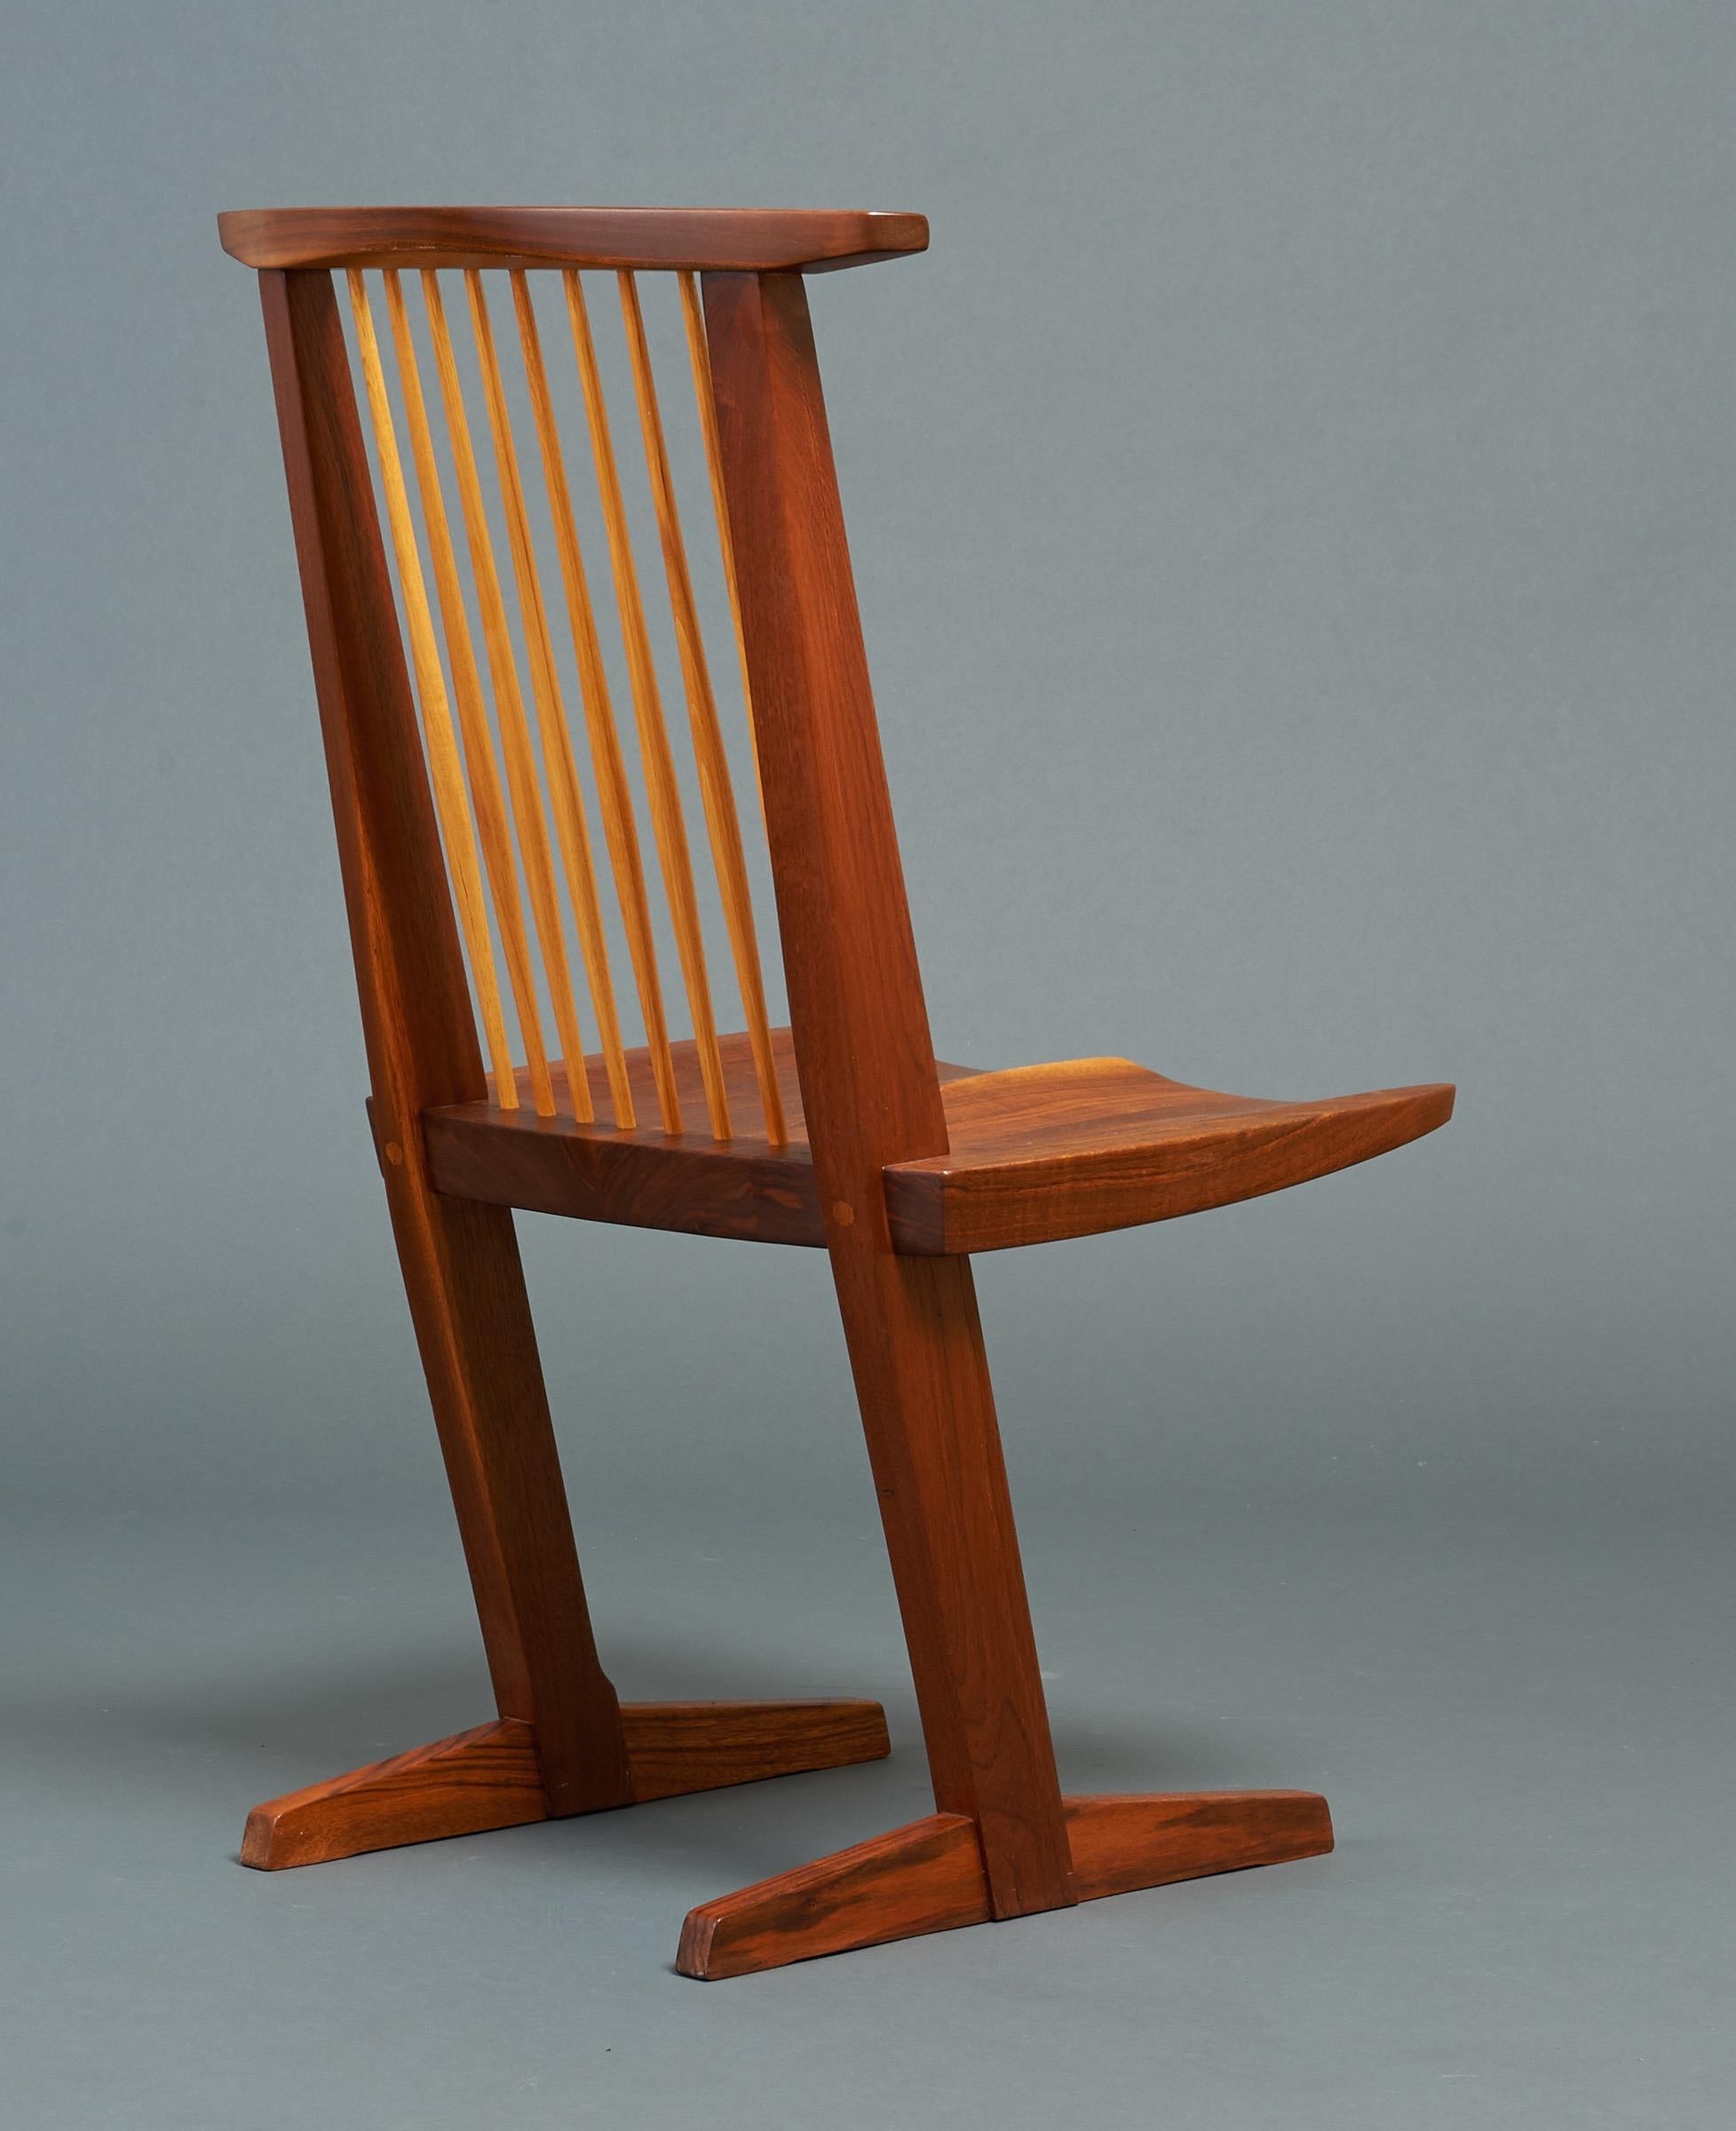 George Nakashima, Rare Sculptural Pair of Conoid Chairs in Walnut, Signed, 1989 For Sale 1